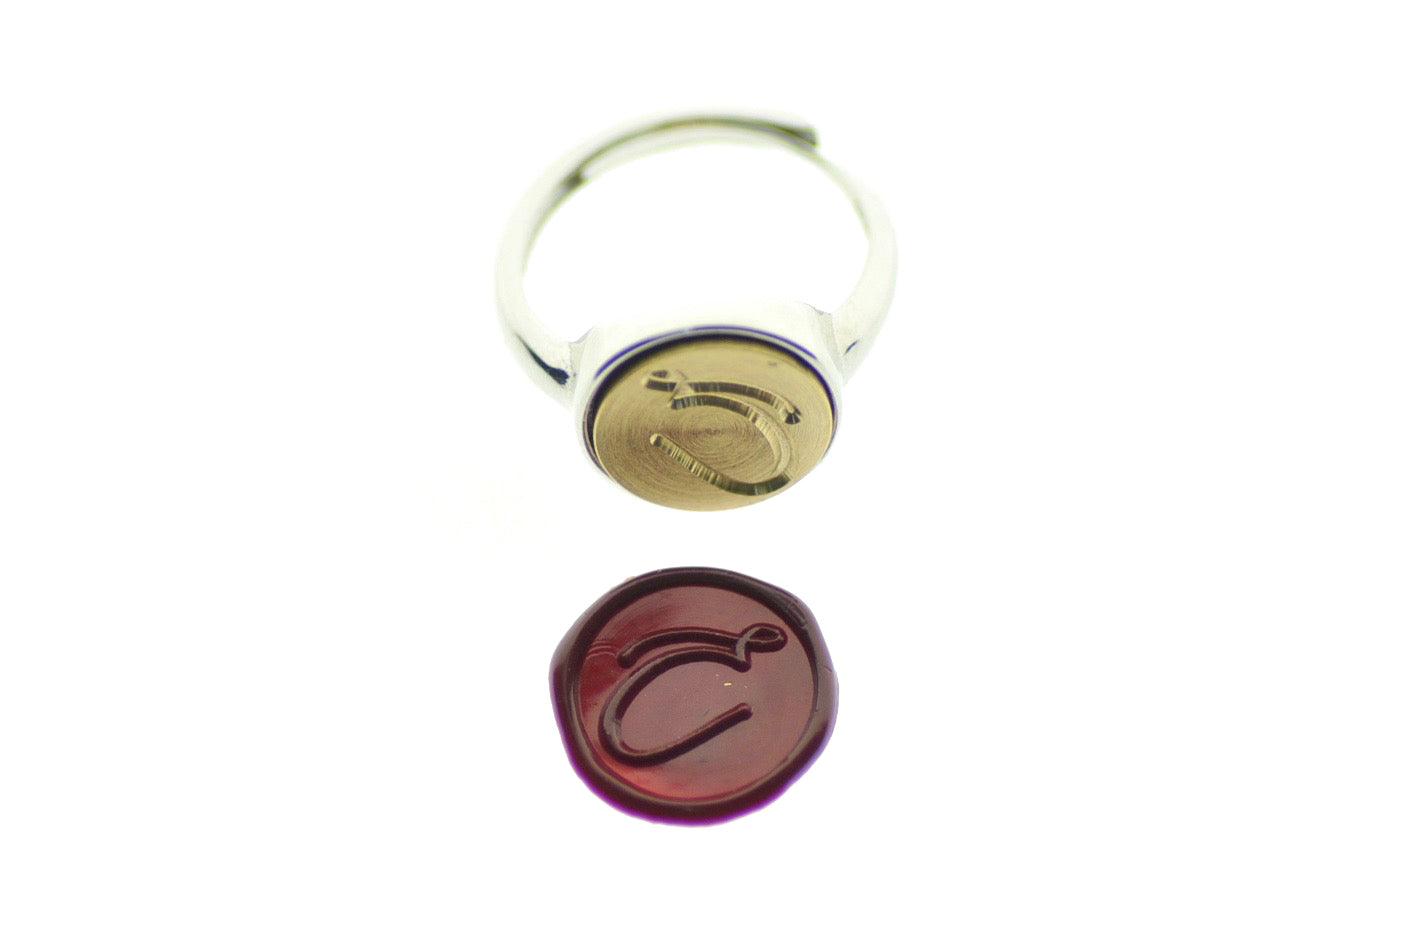 Linen & Leaf Modern Calligraphy Initial Signet Ring - Backtozero B20 - 1 initial, 12mm, 12mm ring, 12mn, 1initial, accessory, Calligraphy, collaboration, fancy, her, initial ring, jewelry, Monogram, One Initial, ring, signet ring, wax seal, wax seal stamp